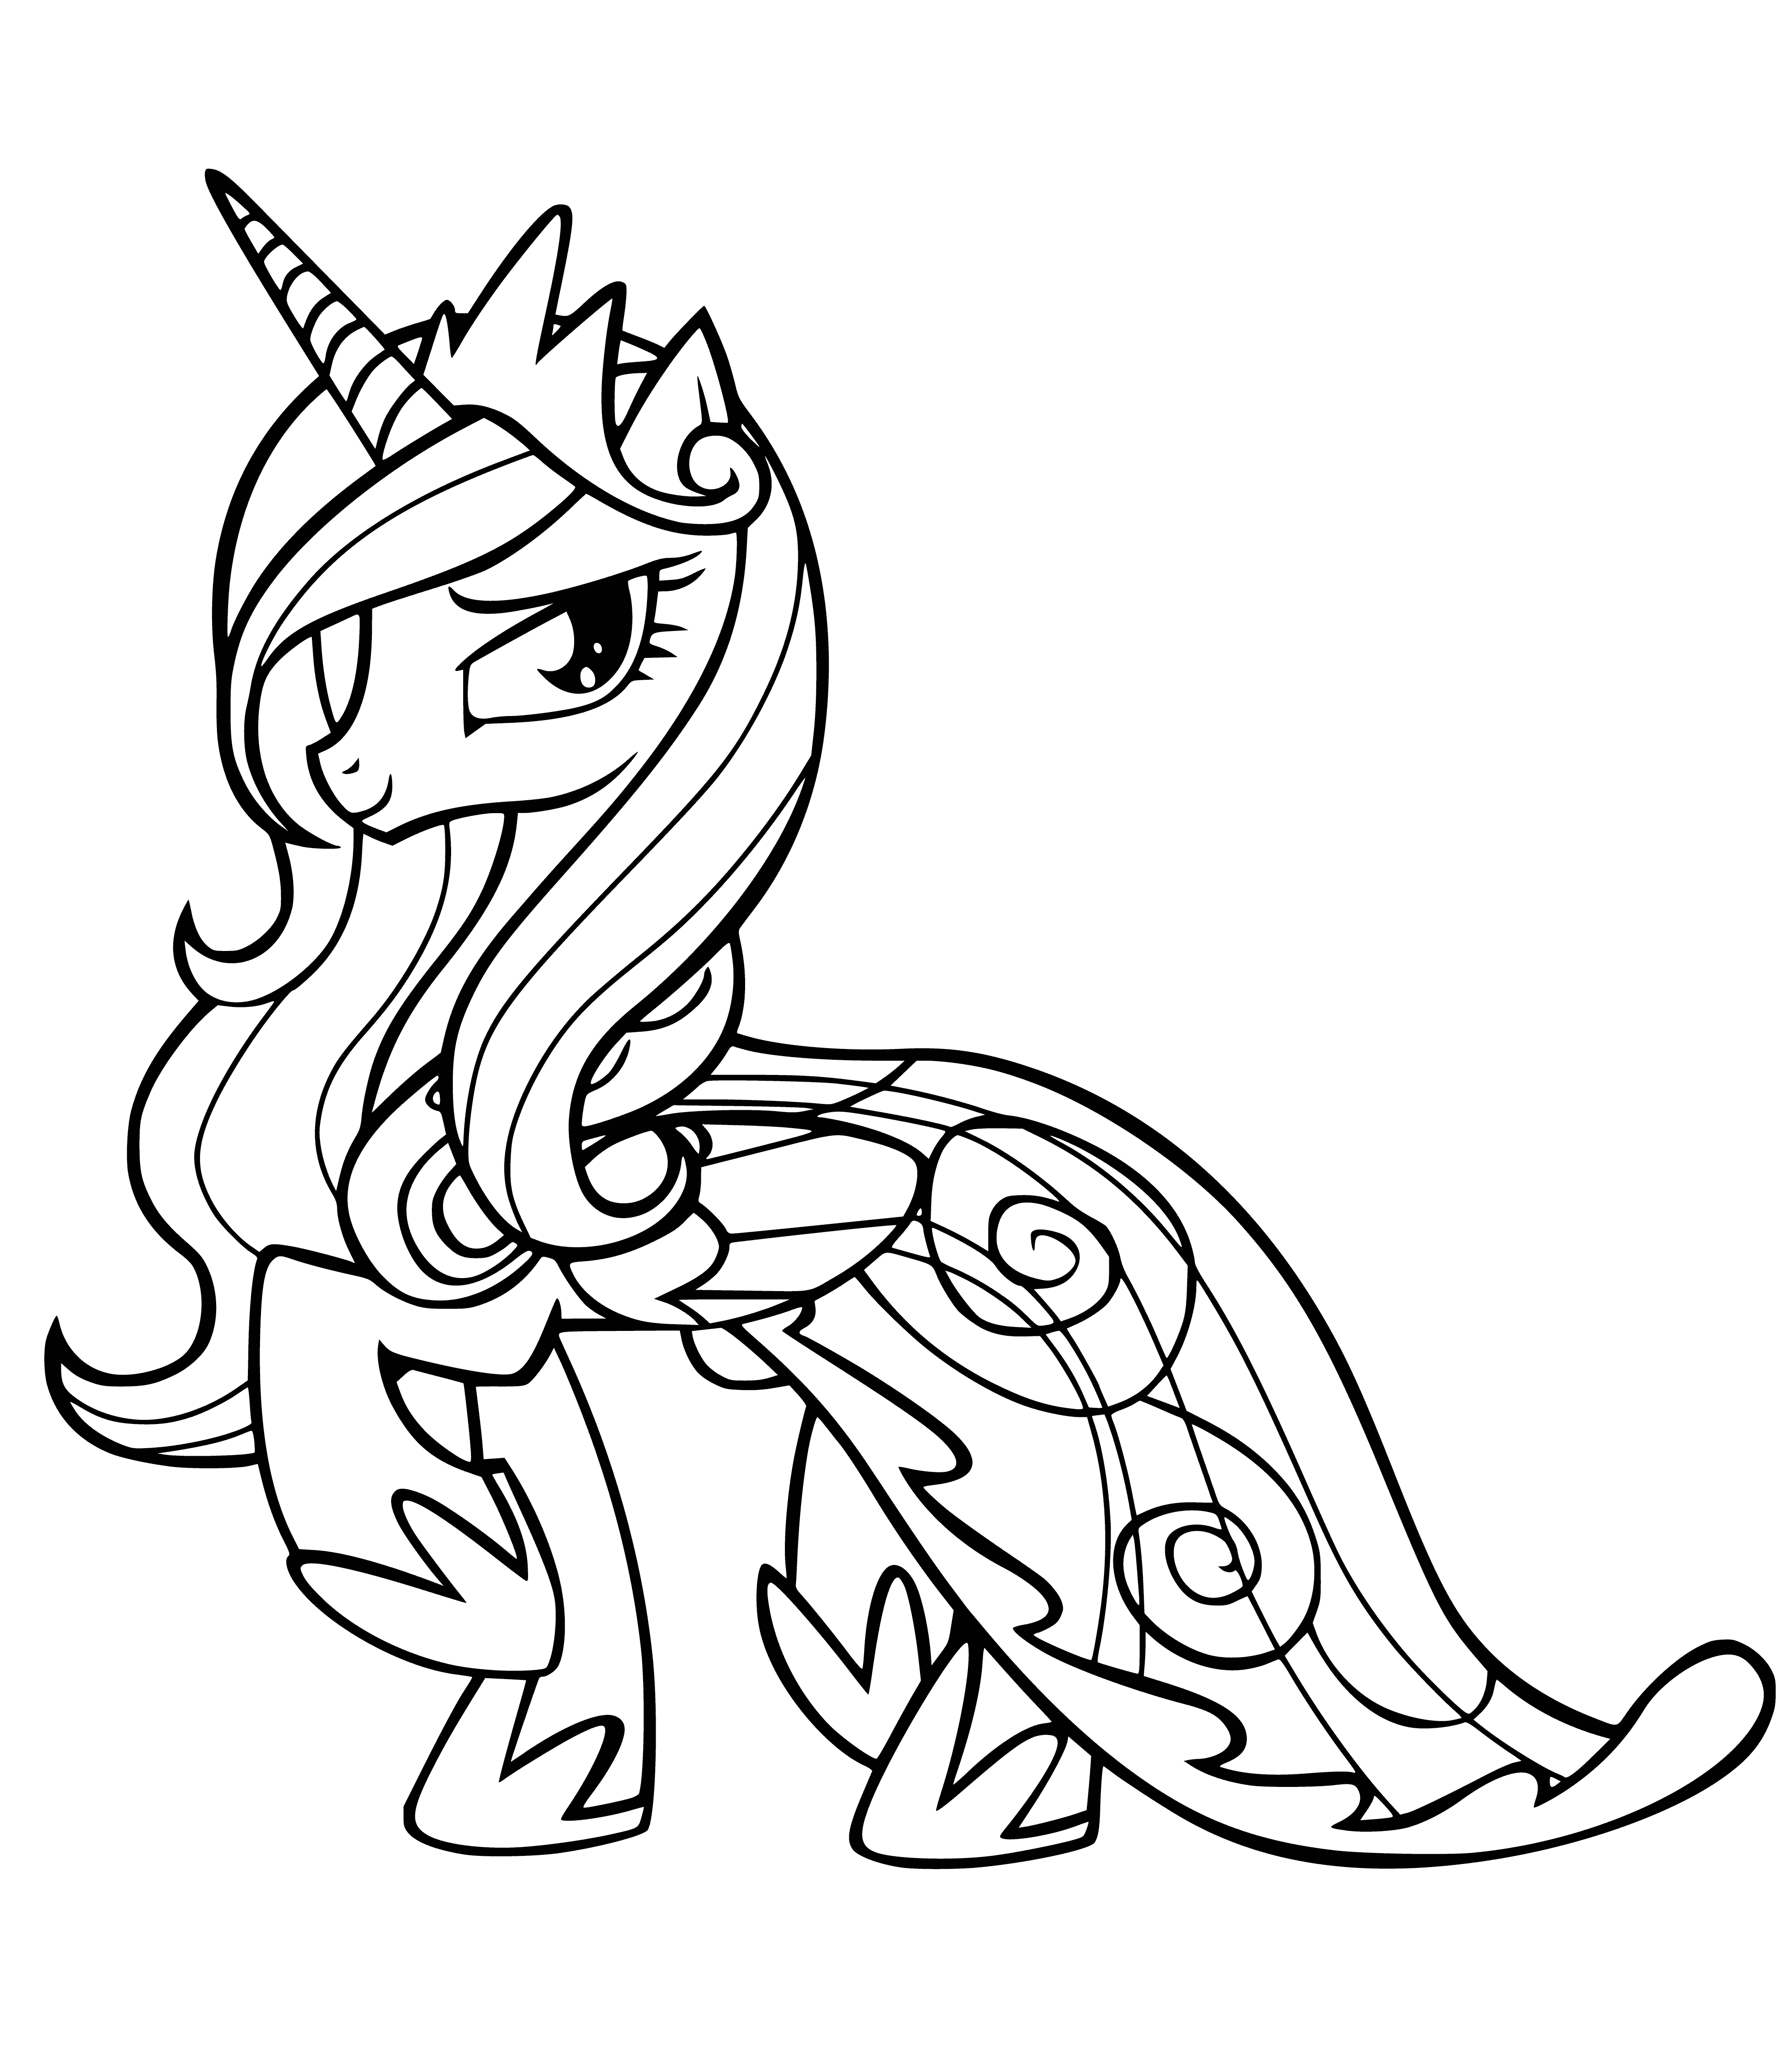 Cadance is a light pink pony with a purple mane and tail, holding a crown and wand.